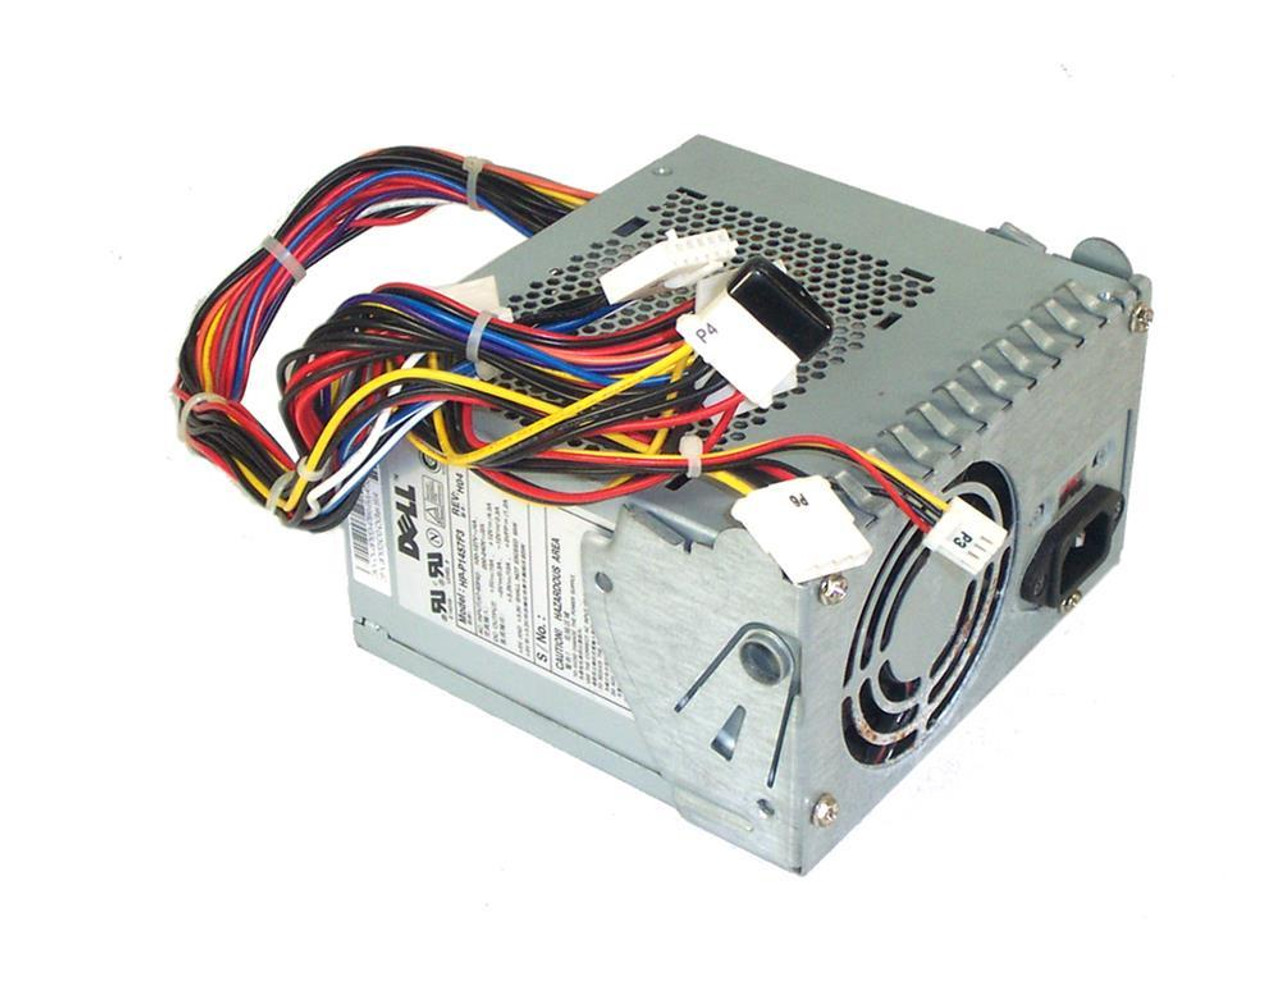 008765D Dell 145-Watts ATX Power Supply for Dimension 400C